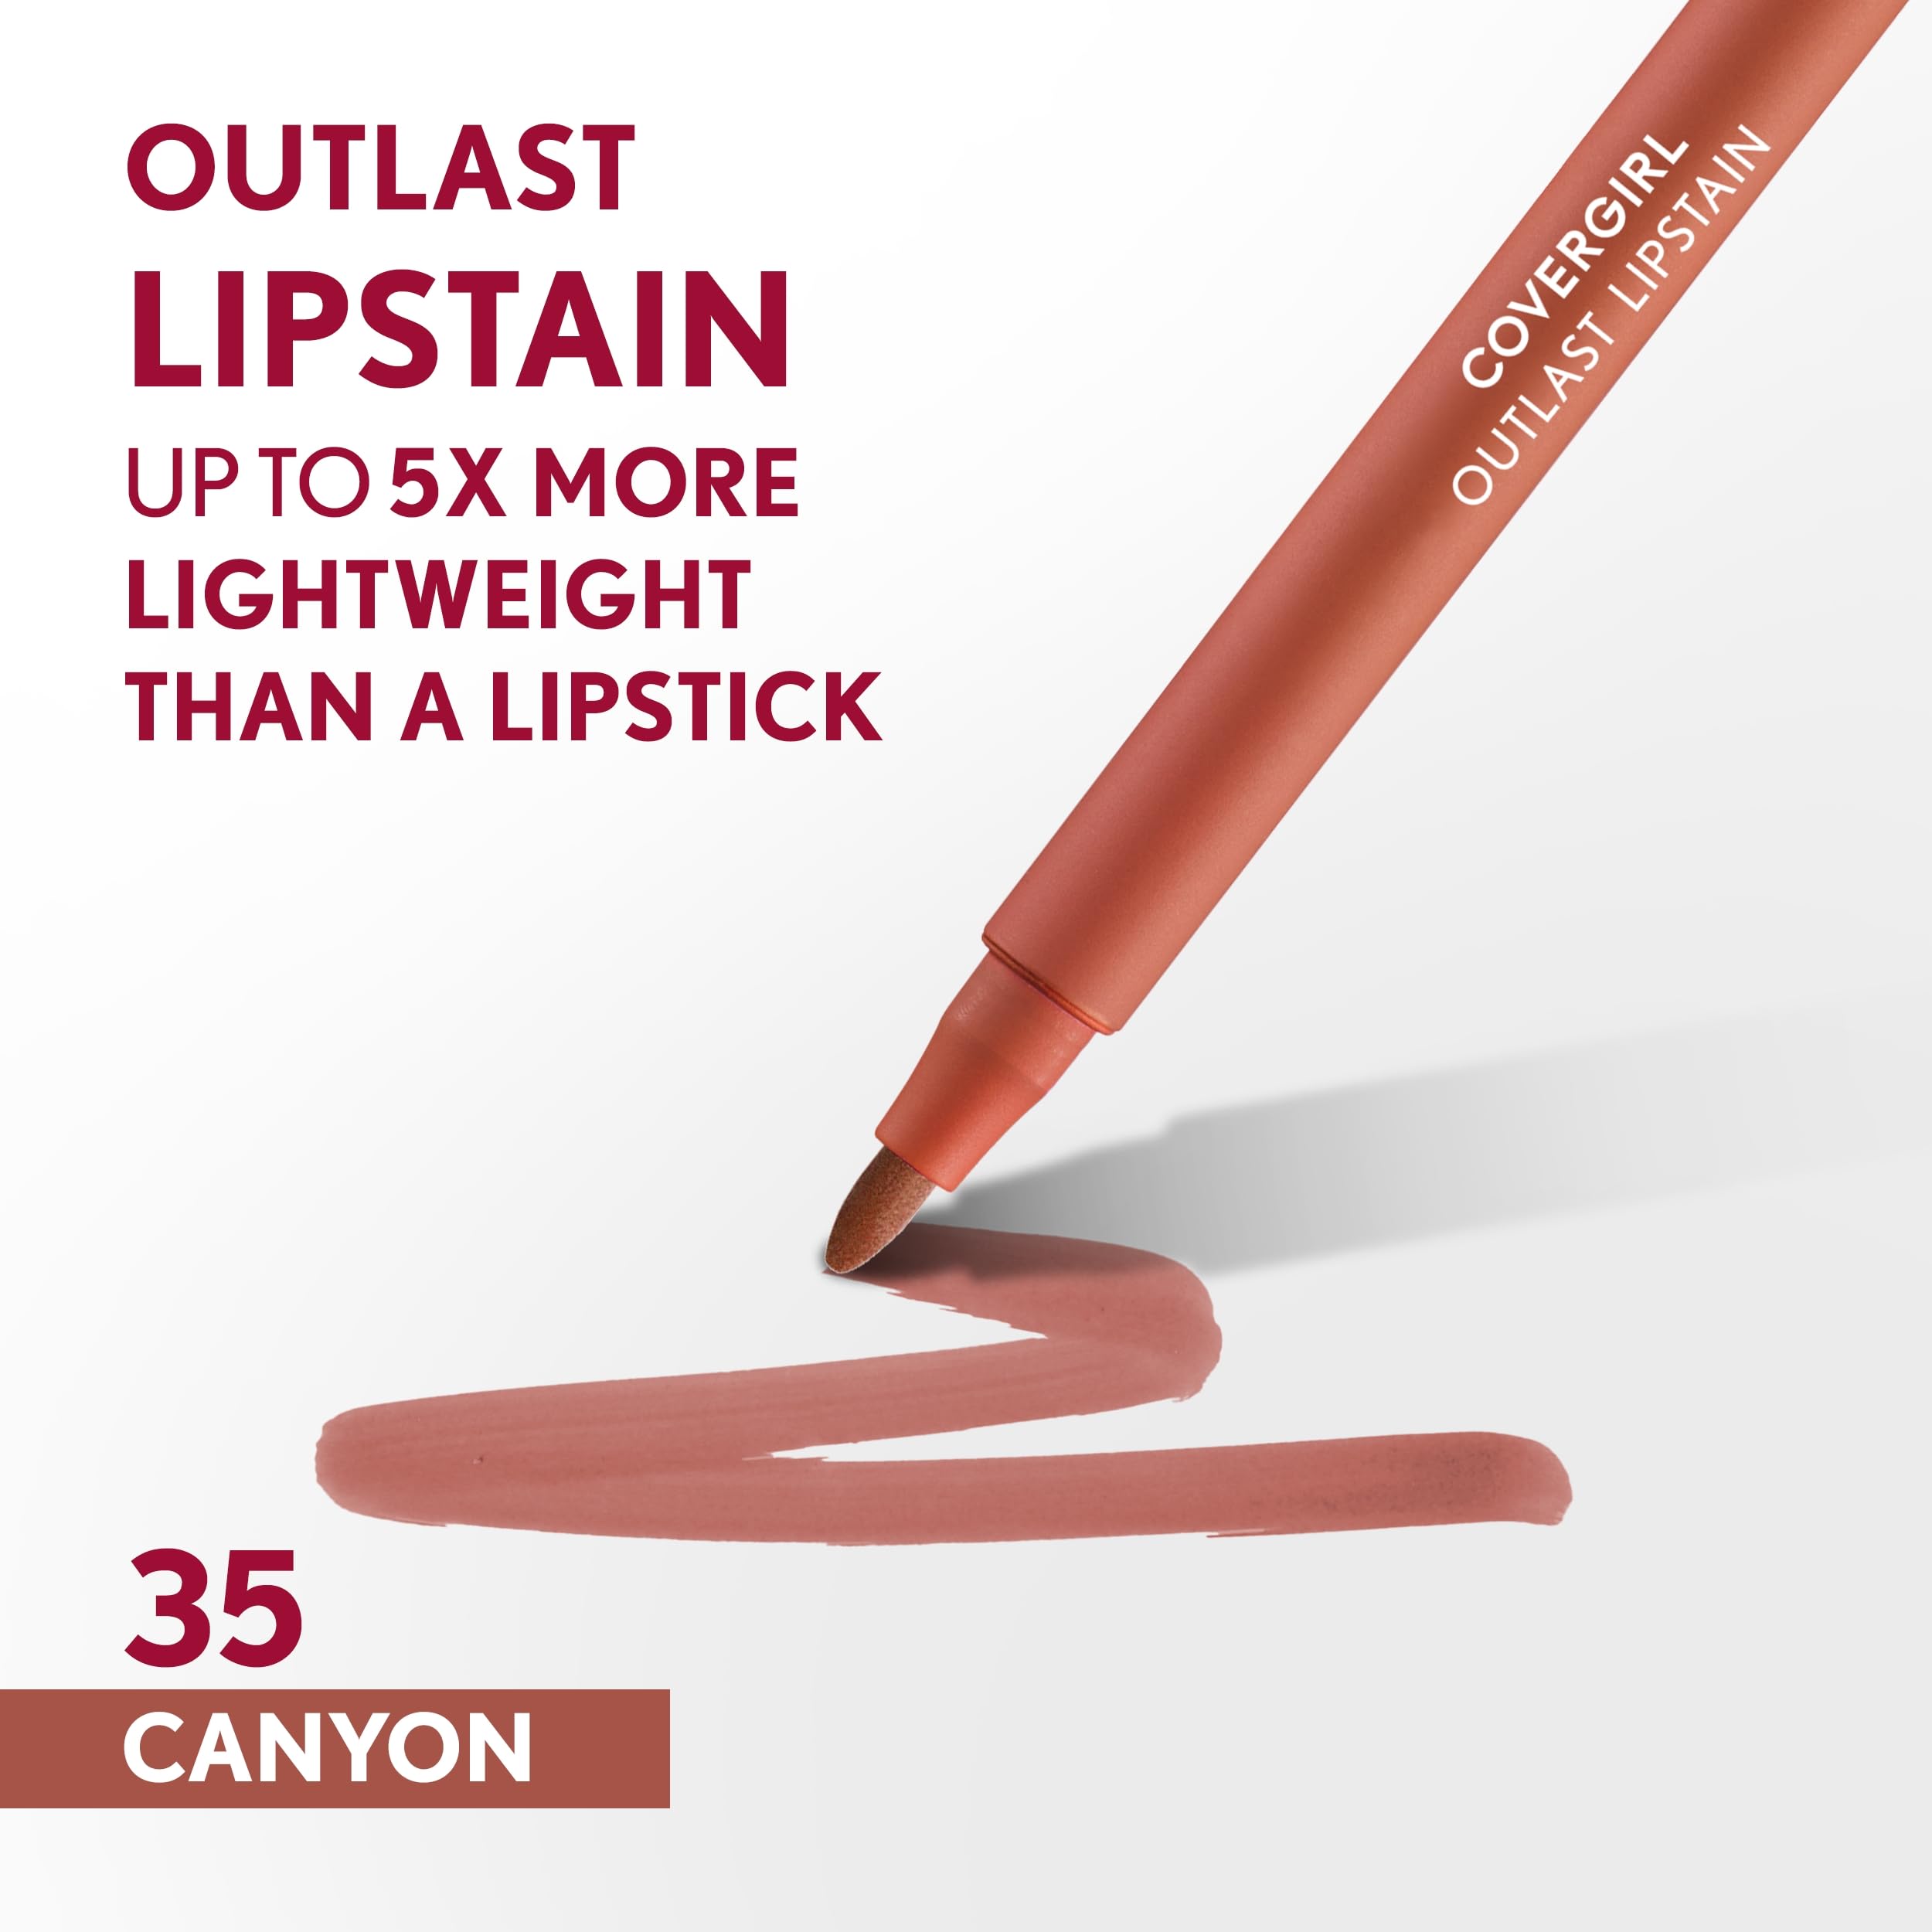 Covergirl Outlast, 35 Canyon, Lipstain, Smooth Application, Precise Pen-Like Tip, Transfer-Proof, Satin Stained Finish, Vegan Formula, 0.06oz